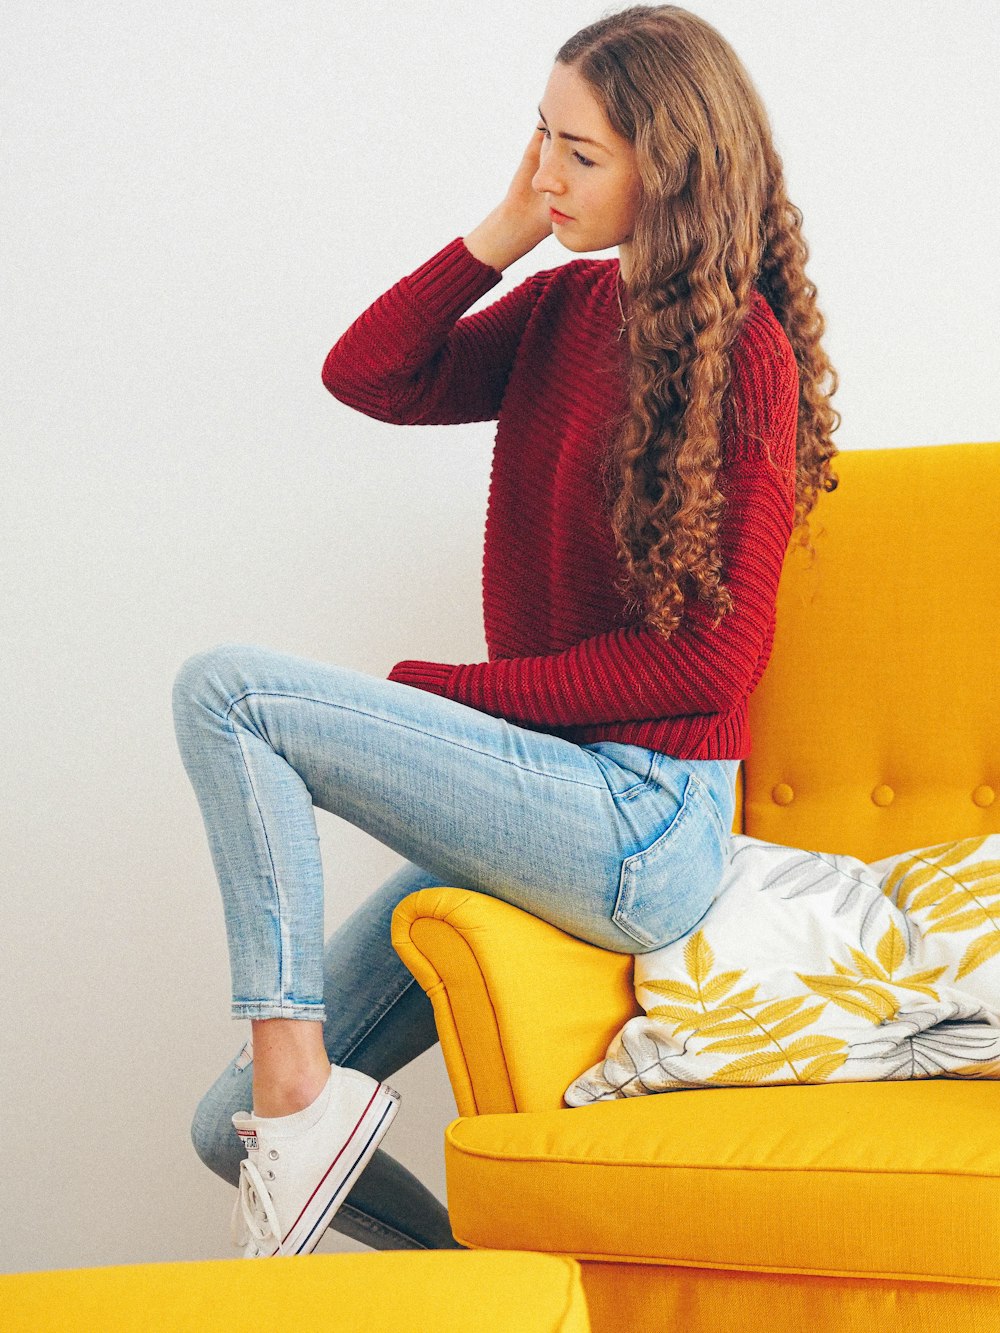 woman in red sweater and blue denim jeans sitting on yellow sofa photo –  Free London Image on Unsplash